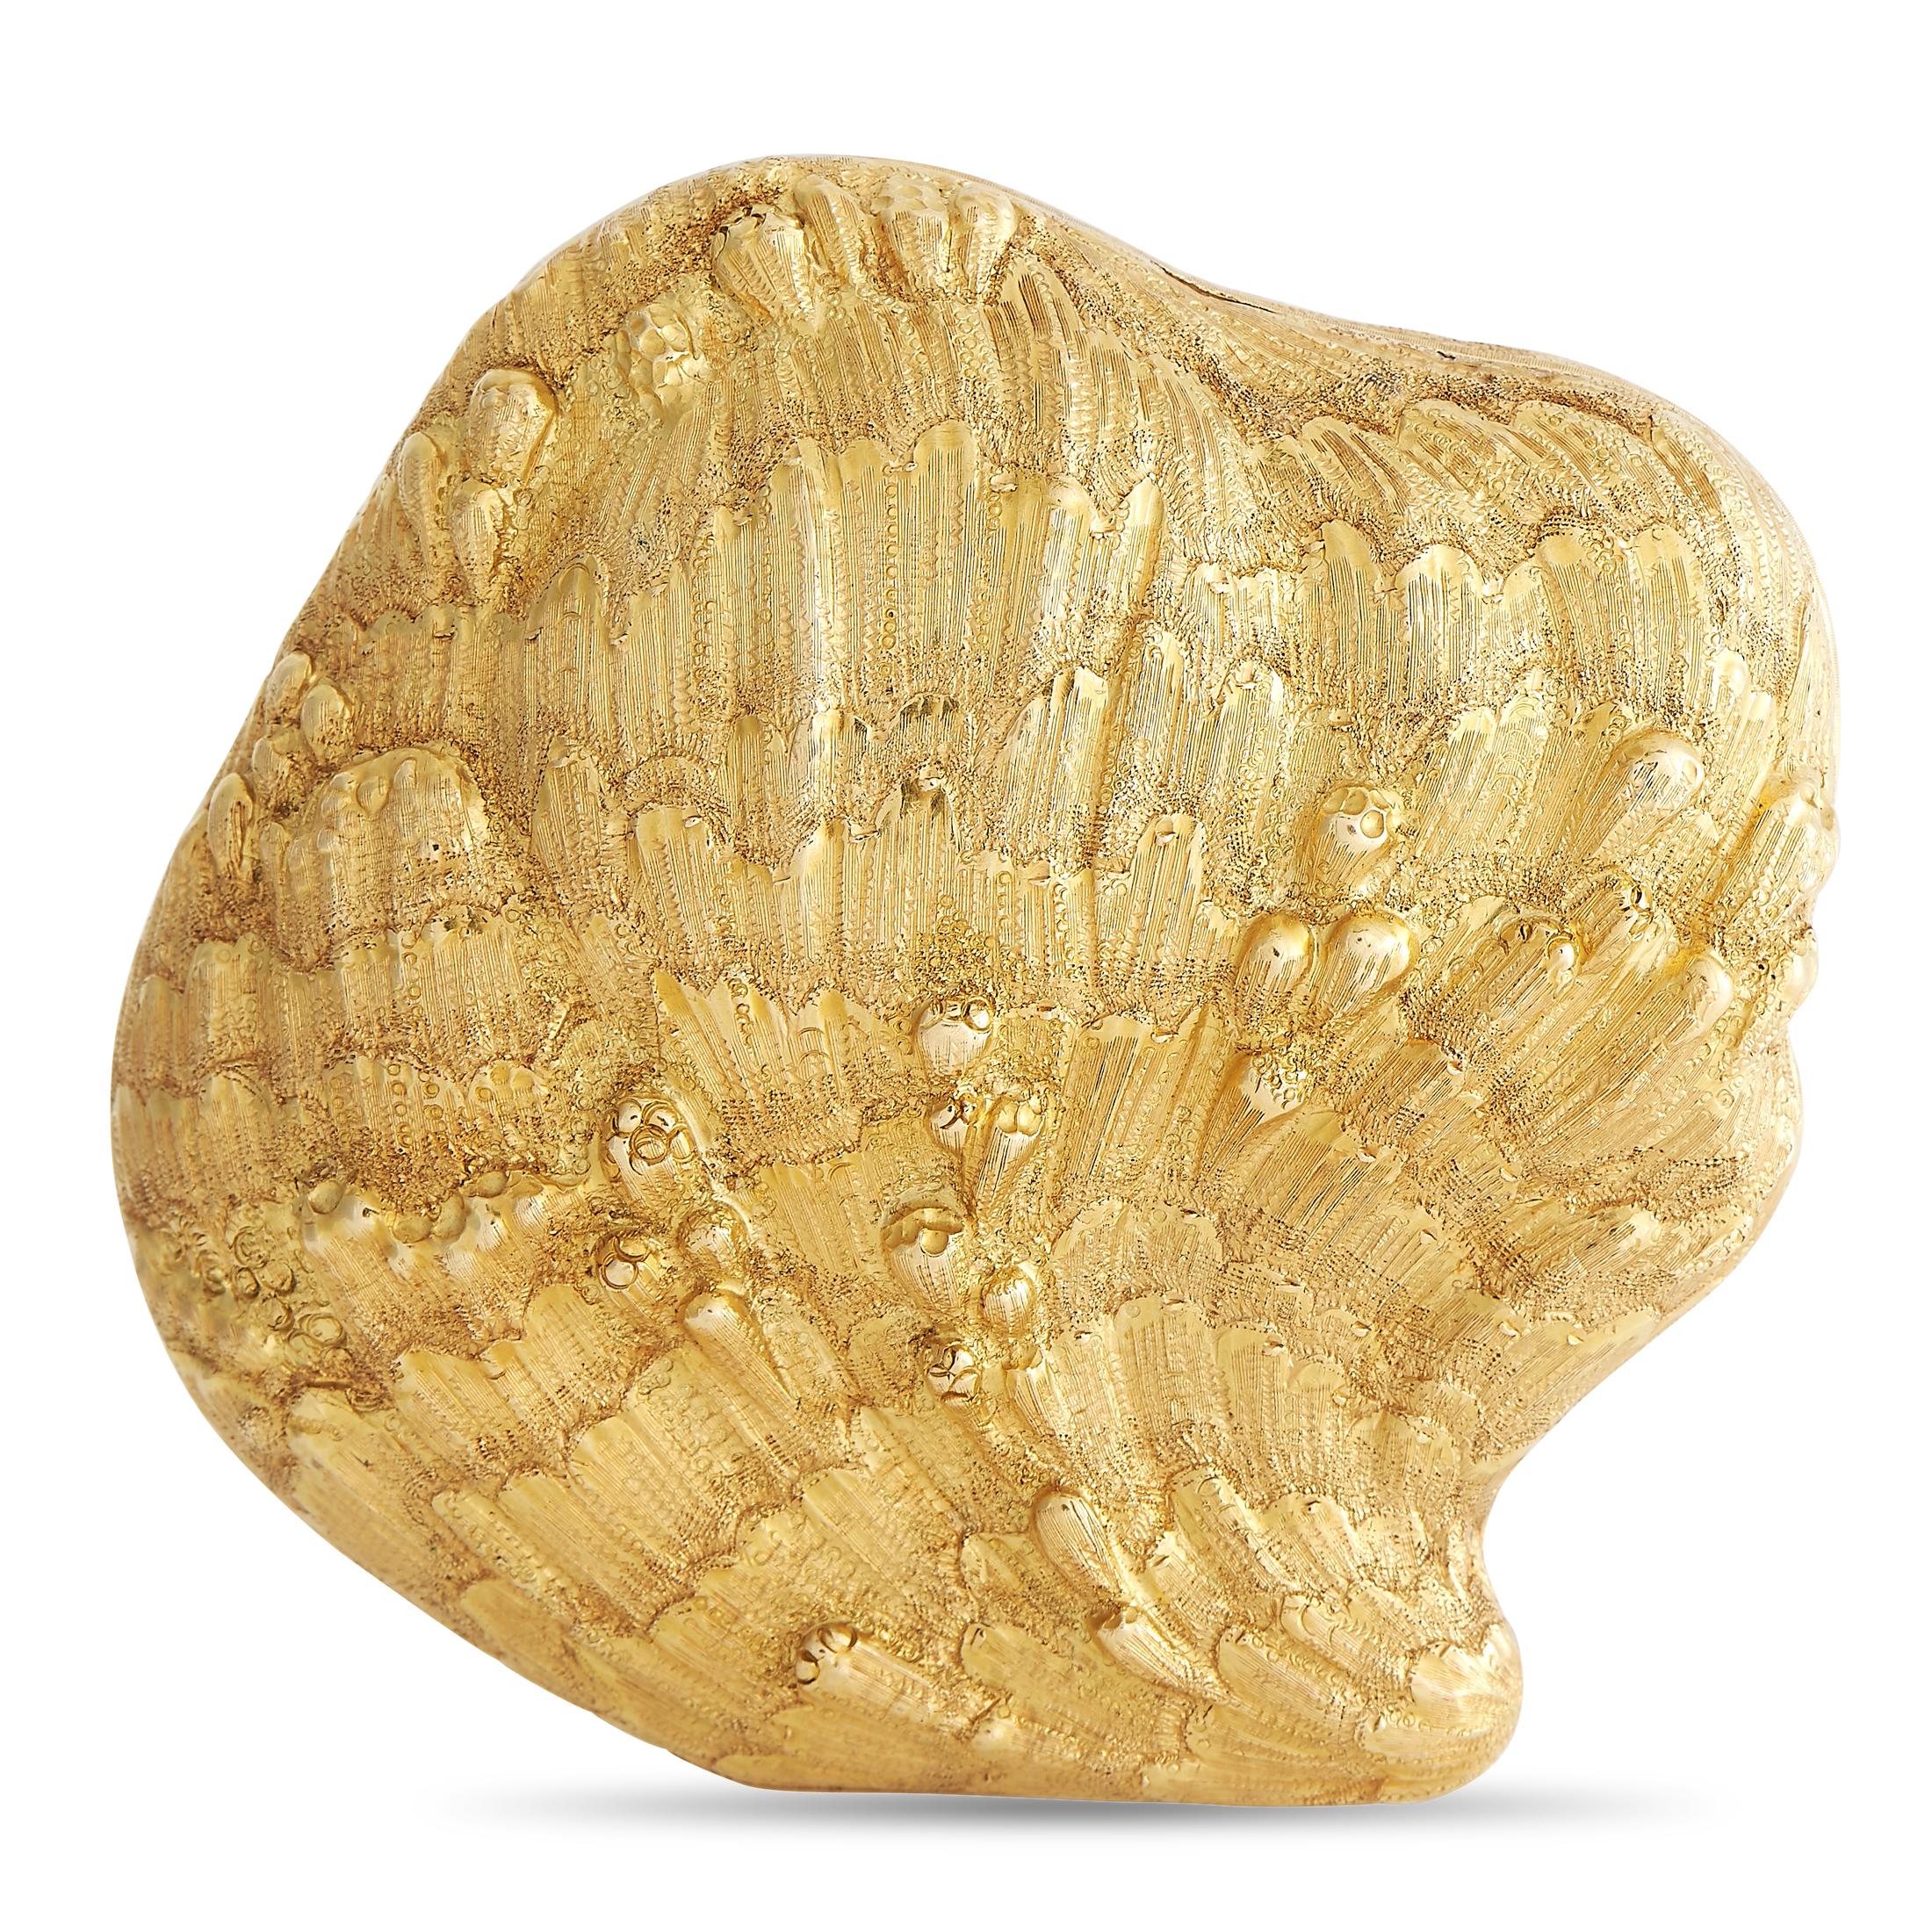 A striking sense of realism makes this Buccellati shell compact practically a work of art. Crafted from 18K yellow gold, this elegant piece measures 3” long by 3” wide and features a mirror housed within the hinged design. 

This jewelry piece is